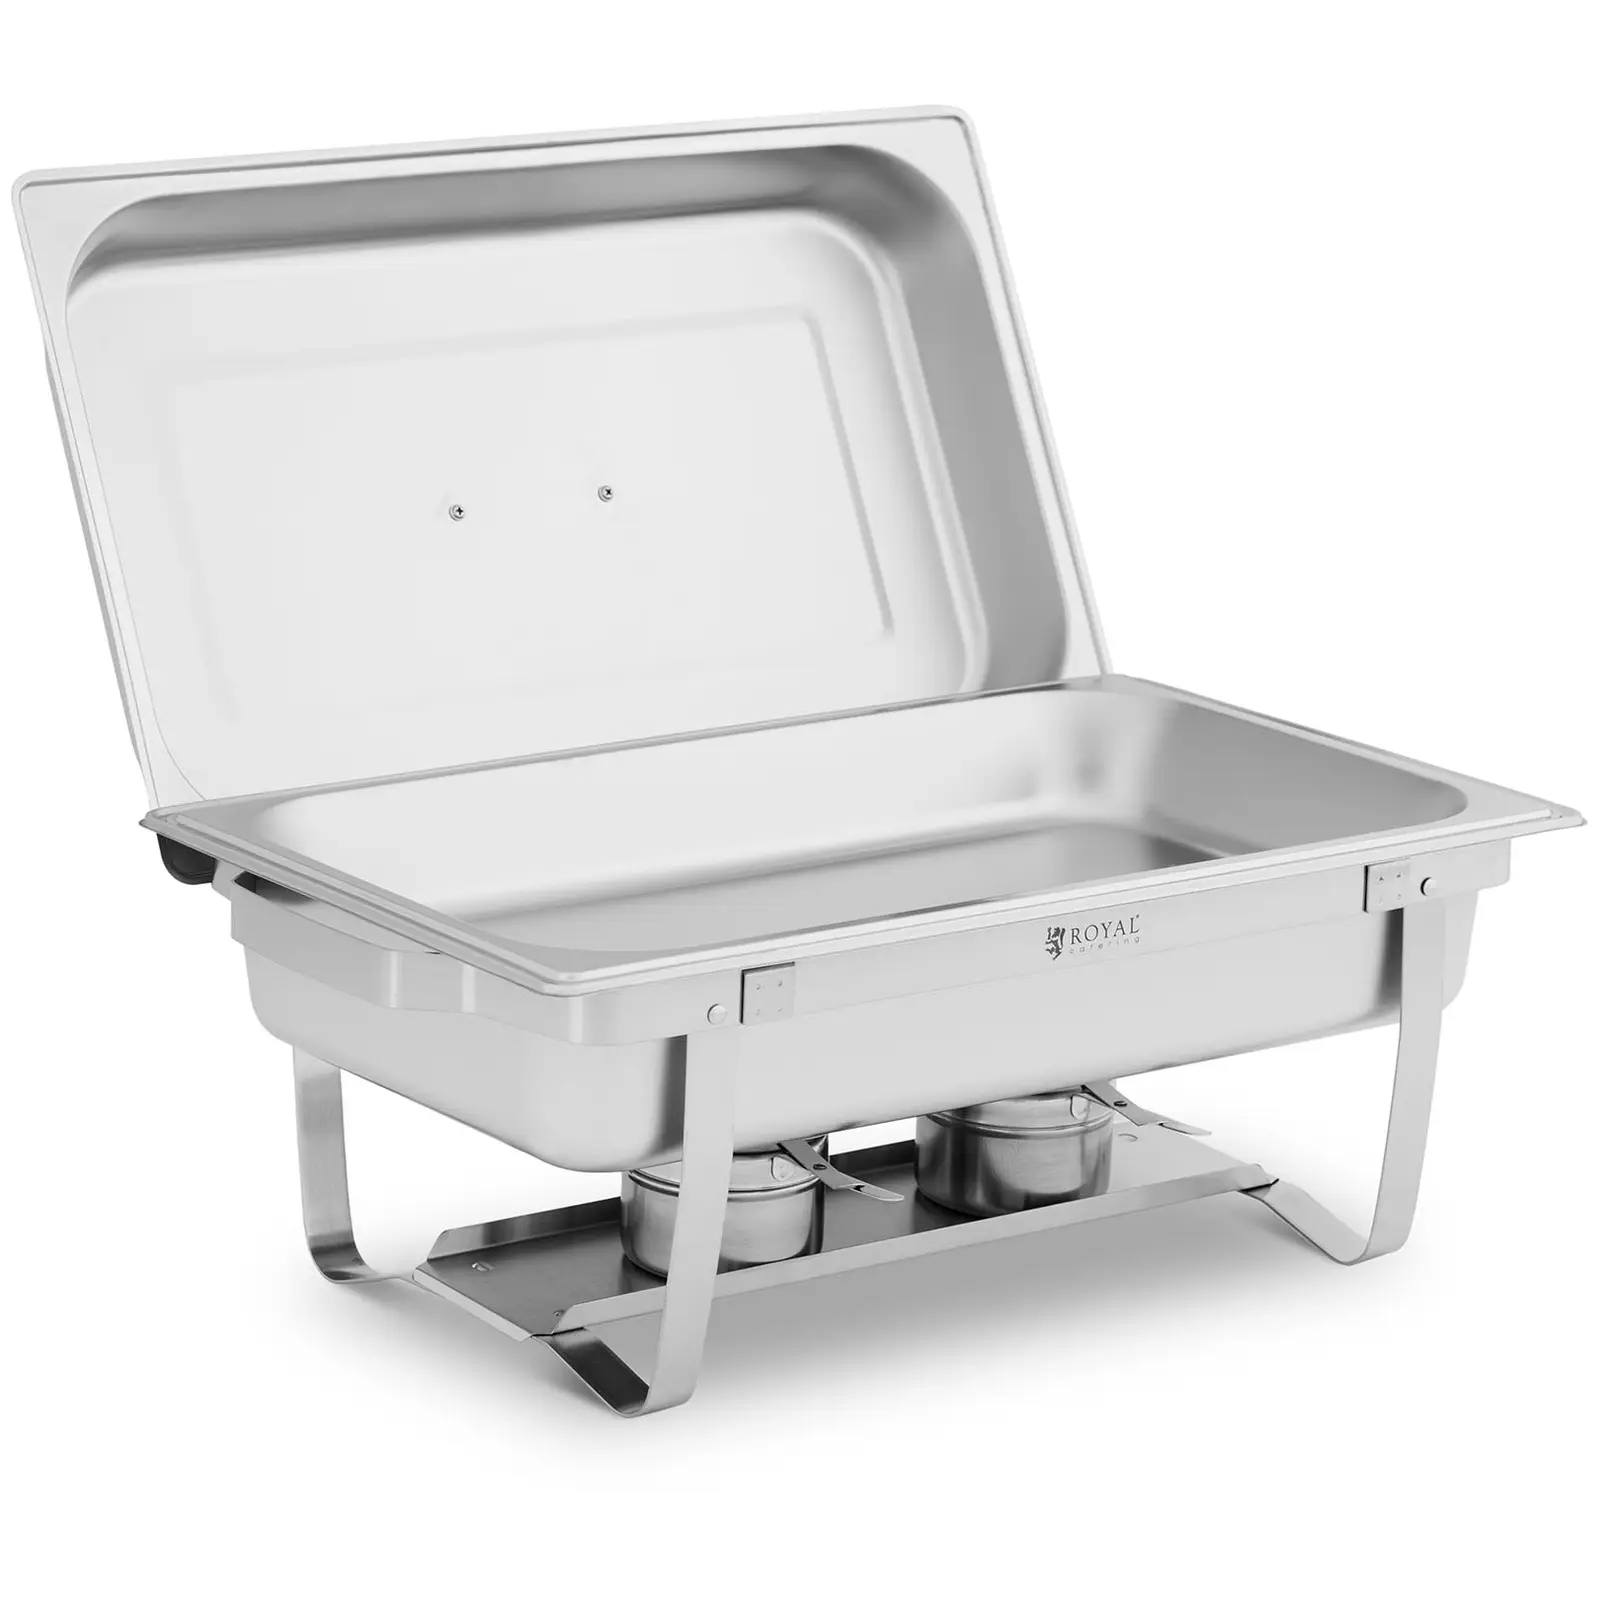 Chafing dish - GN 1/1 - 9 L - 2 Bränslebehållare - 500x300x60 mm - Royal Catering